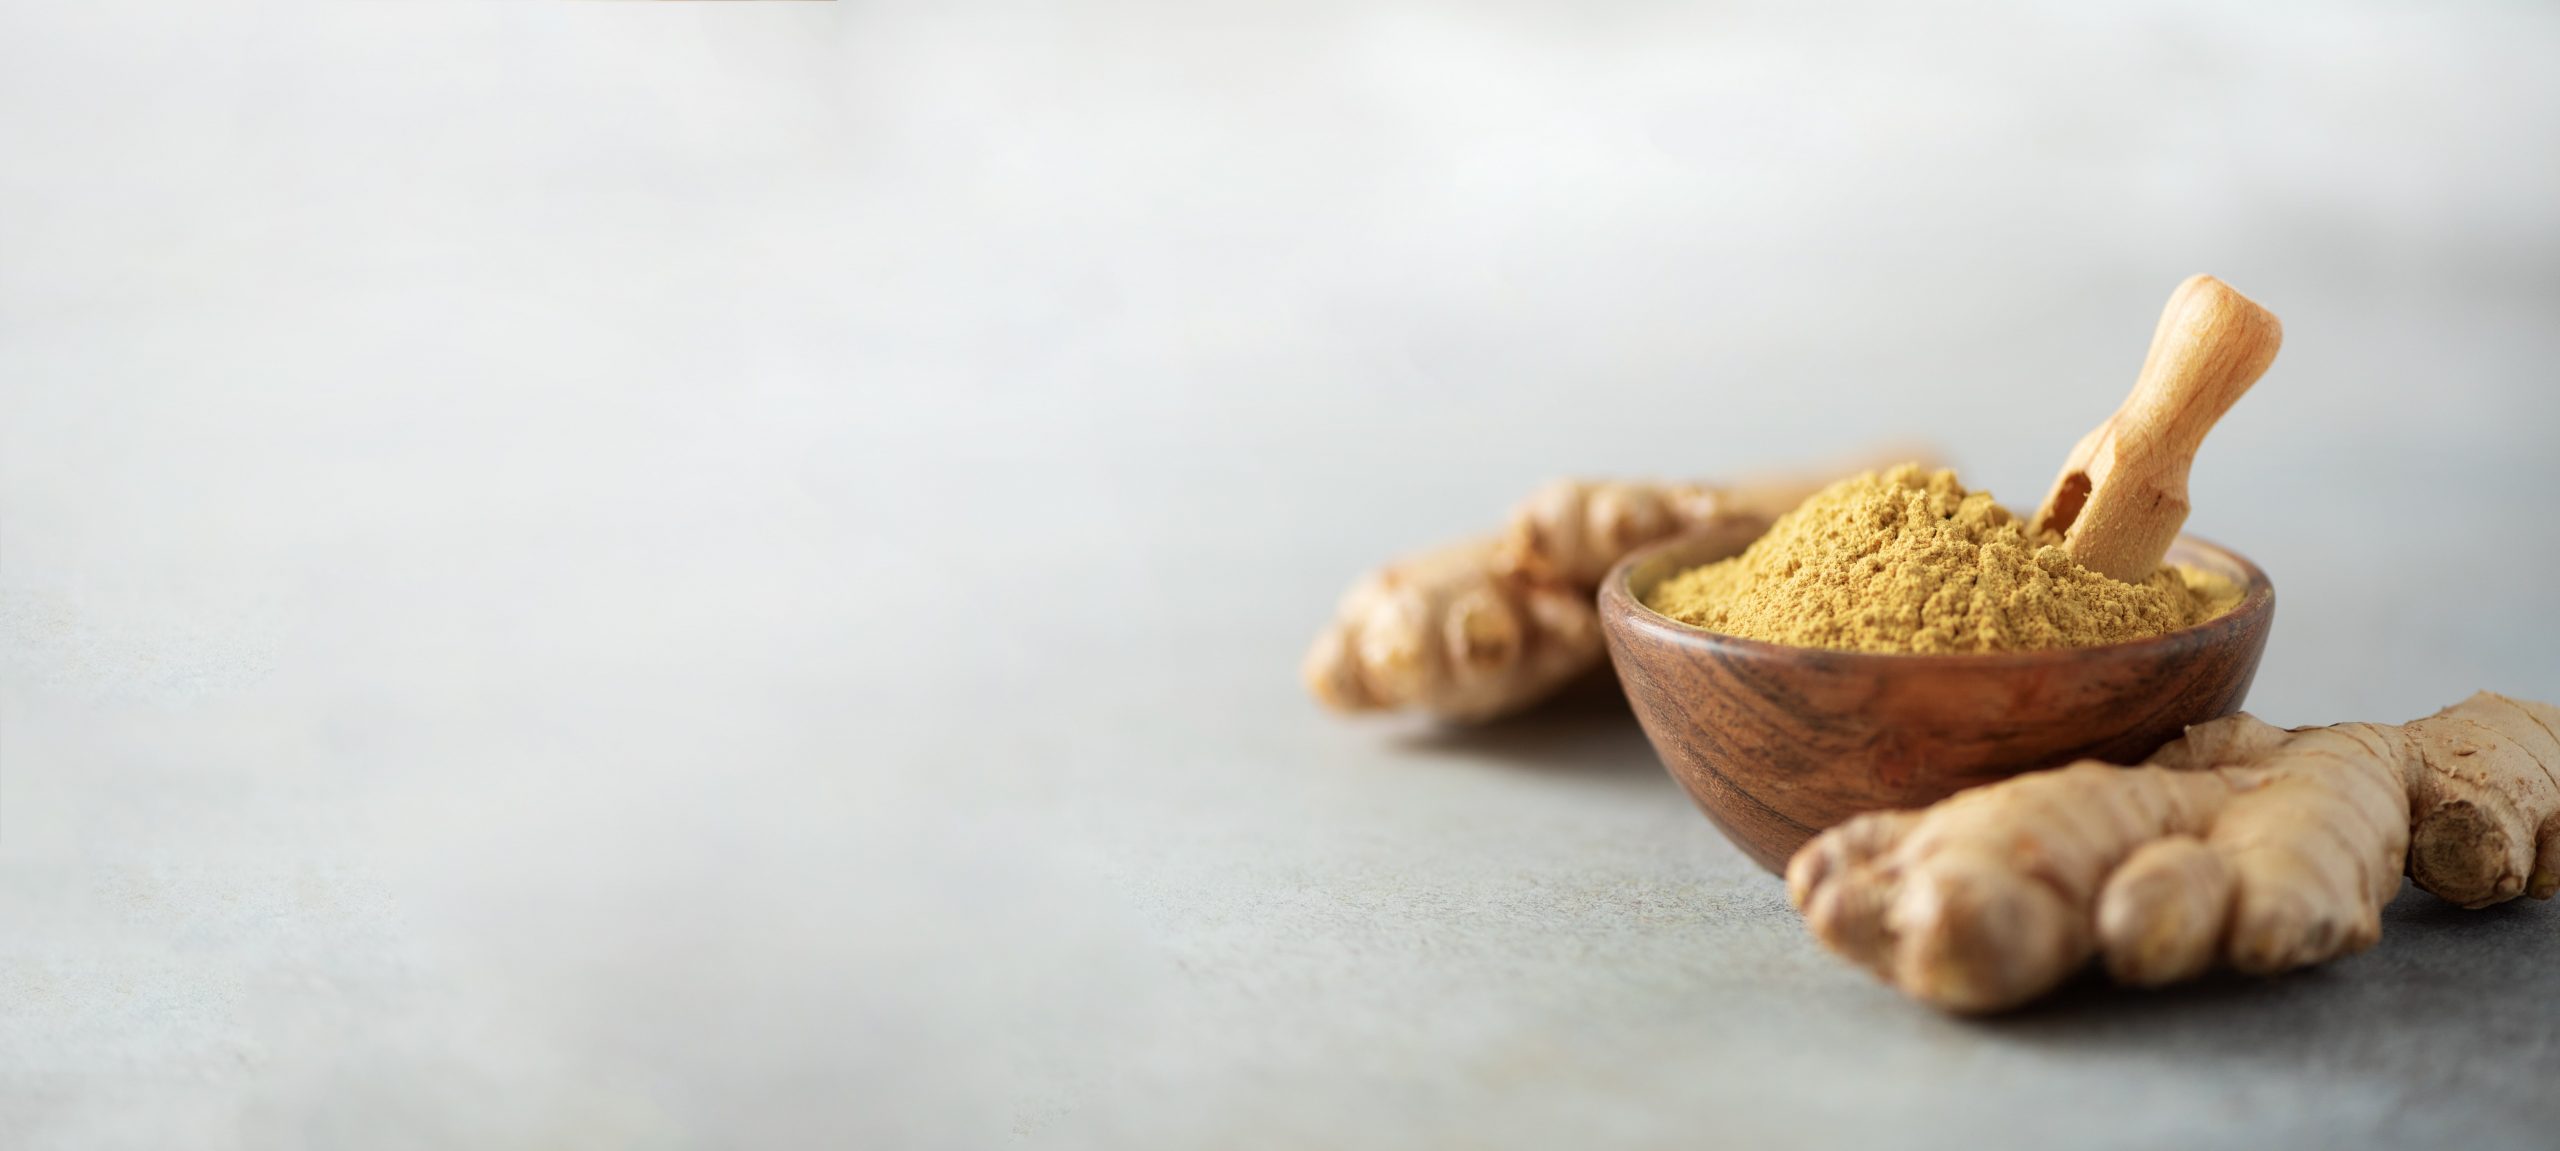 DEFINITION, HEALTH BENEFITS, AND DOWNSIDES OF AYURVEDIC DIE NEw-min